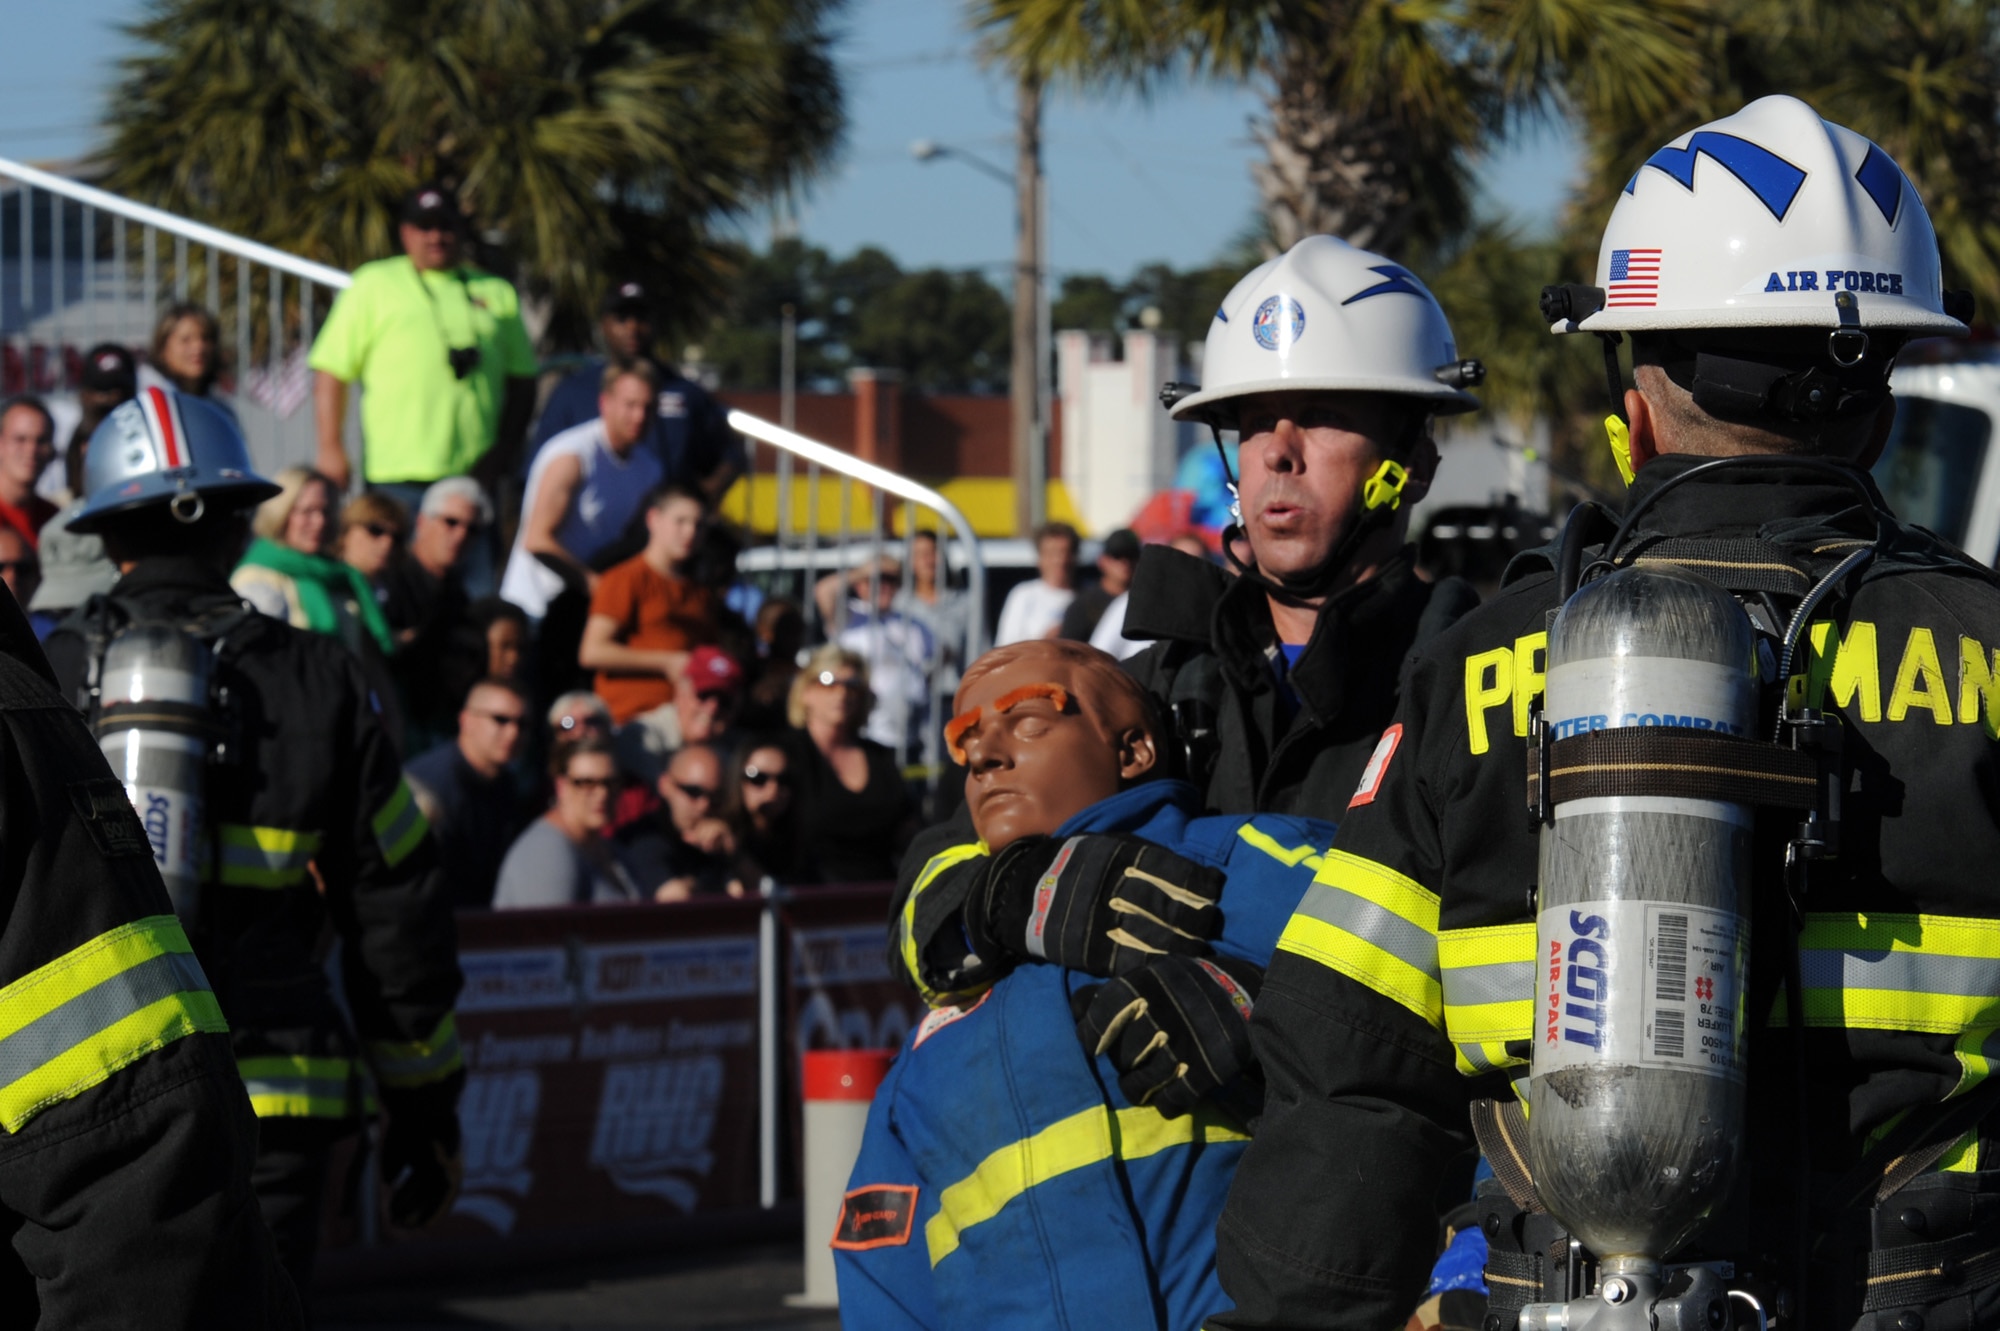 Ken Helgerson "rescues" a life sized 175-pound "victim" as he competes in the team relay event at Myrtle Beach, S.C., on Nov. 13, 2010. Mr. Helgerson is a firefighter at the Air Force Academy in Colorado Springs, Colo. (U.S. Air Force photo/Staff Sgt. Desiree N. Palacios)